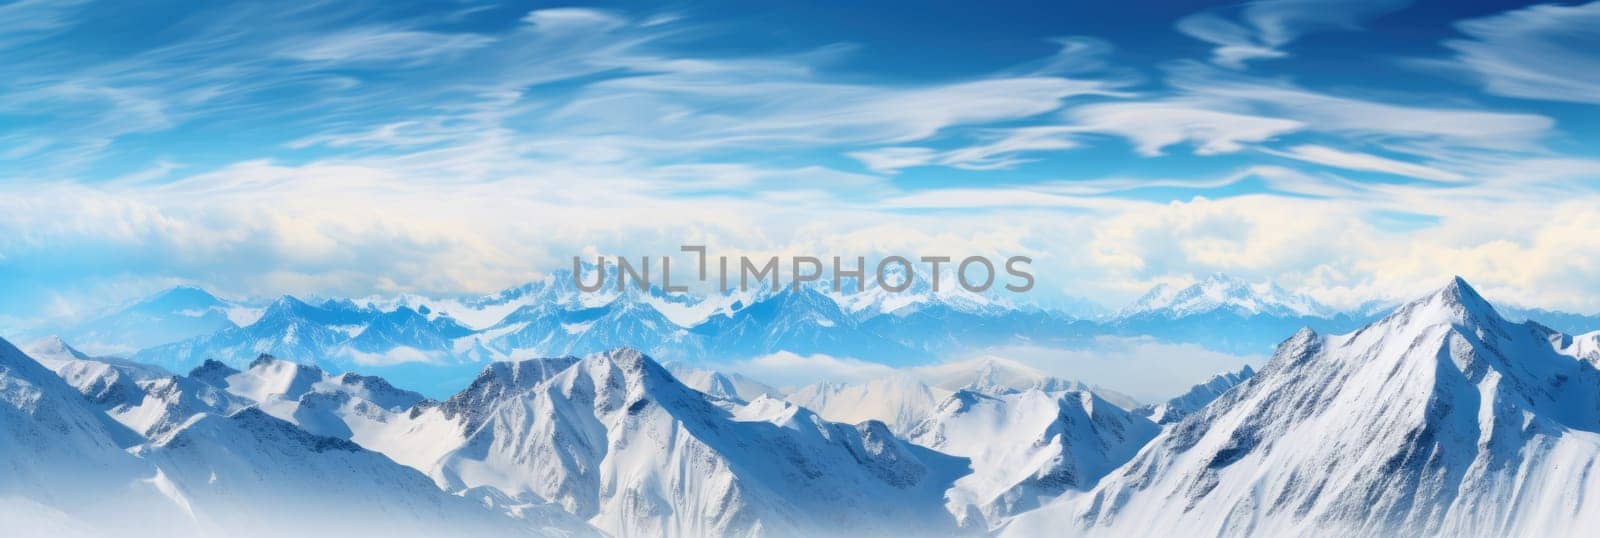 Landscape of a winter mountain range covered in snow with a bright blue sky. by natali_brill